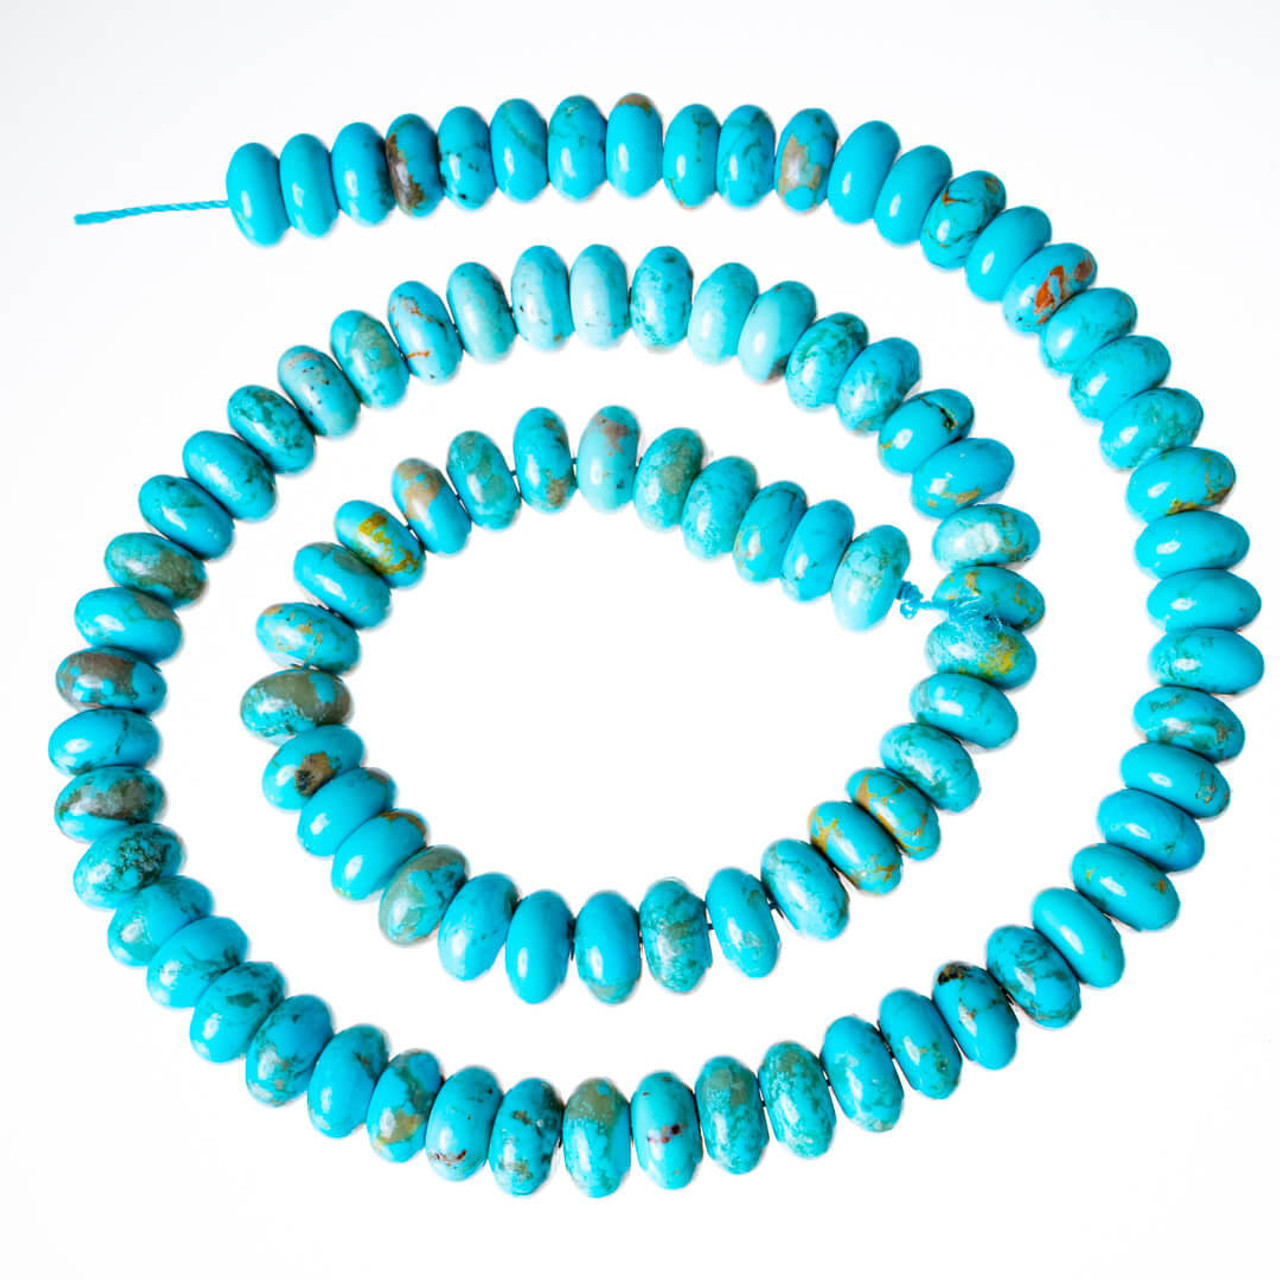 Turquoise Beads Sonoran Gold (Mina Maria)8mm Rondell SGR8R1 